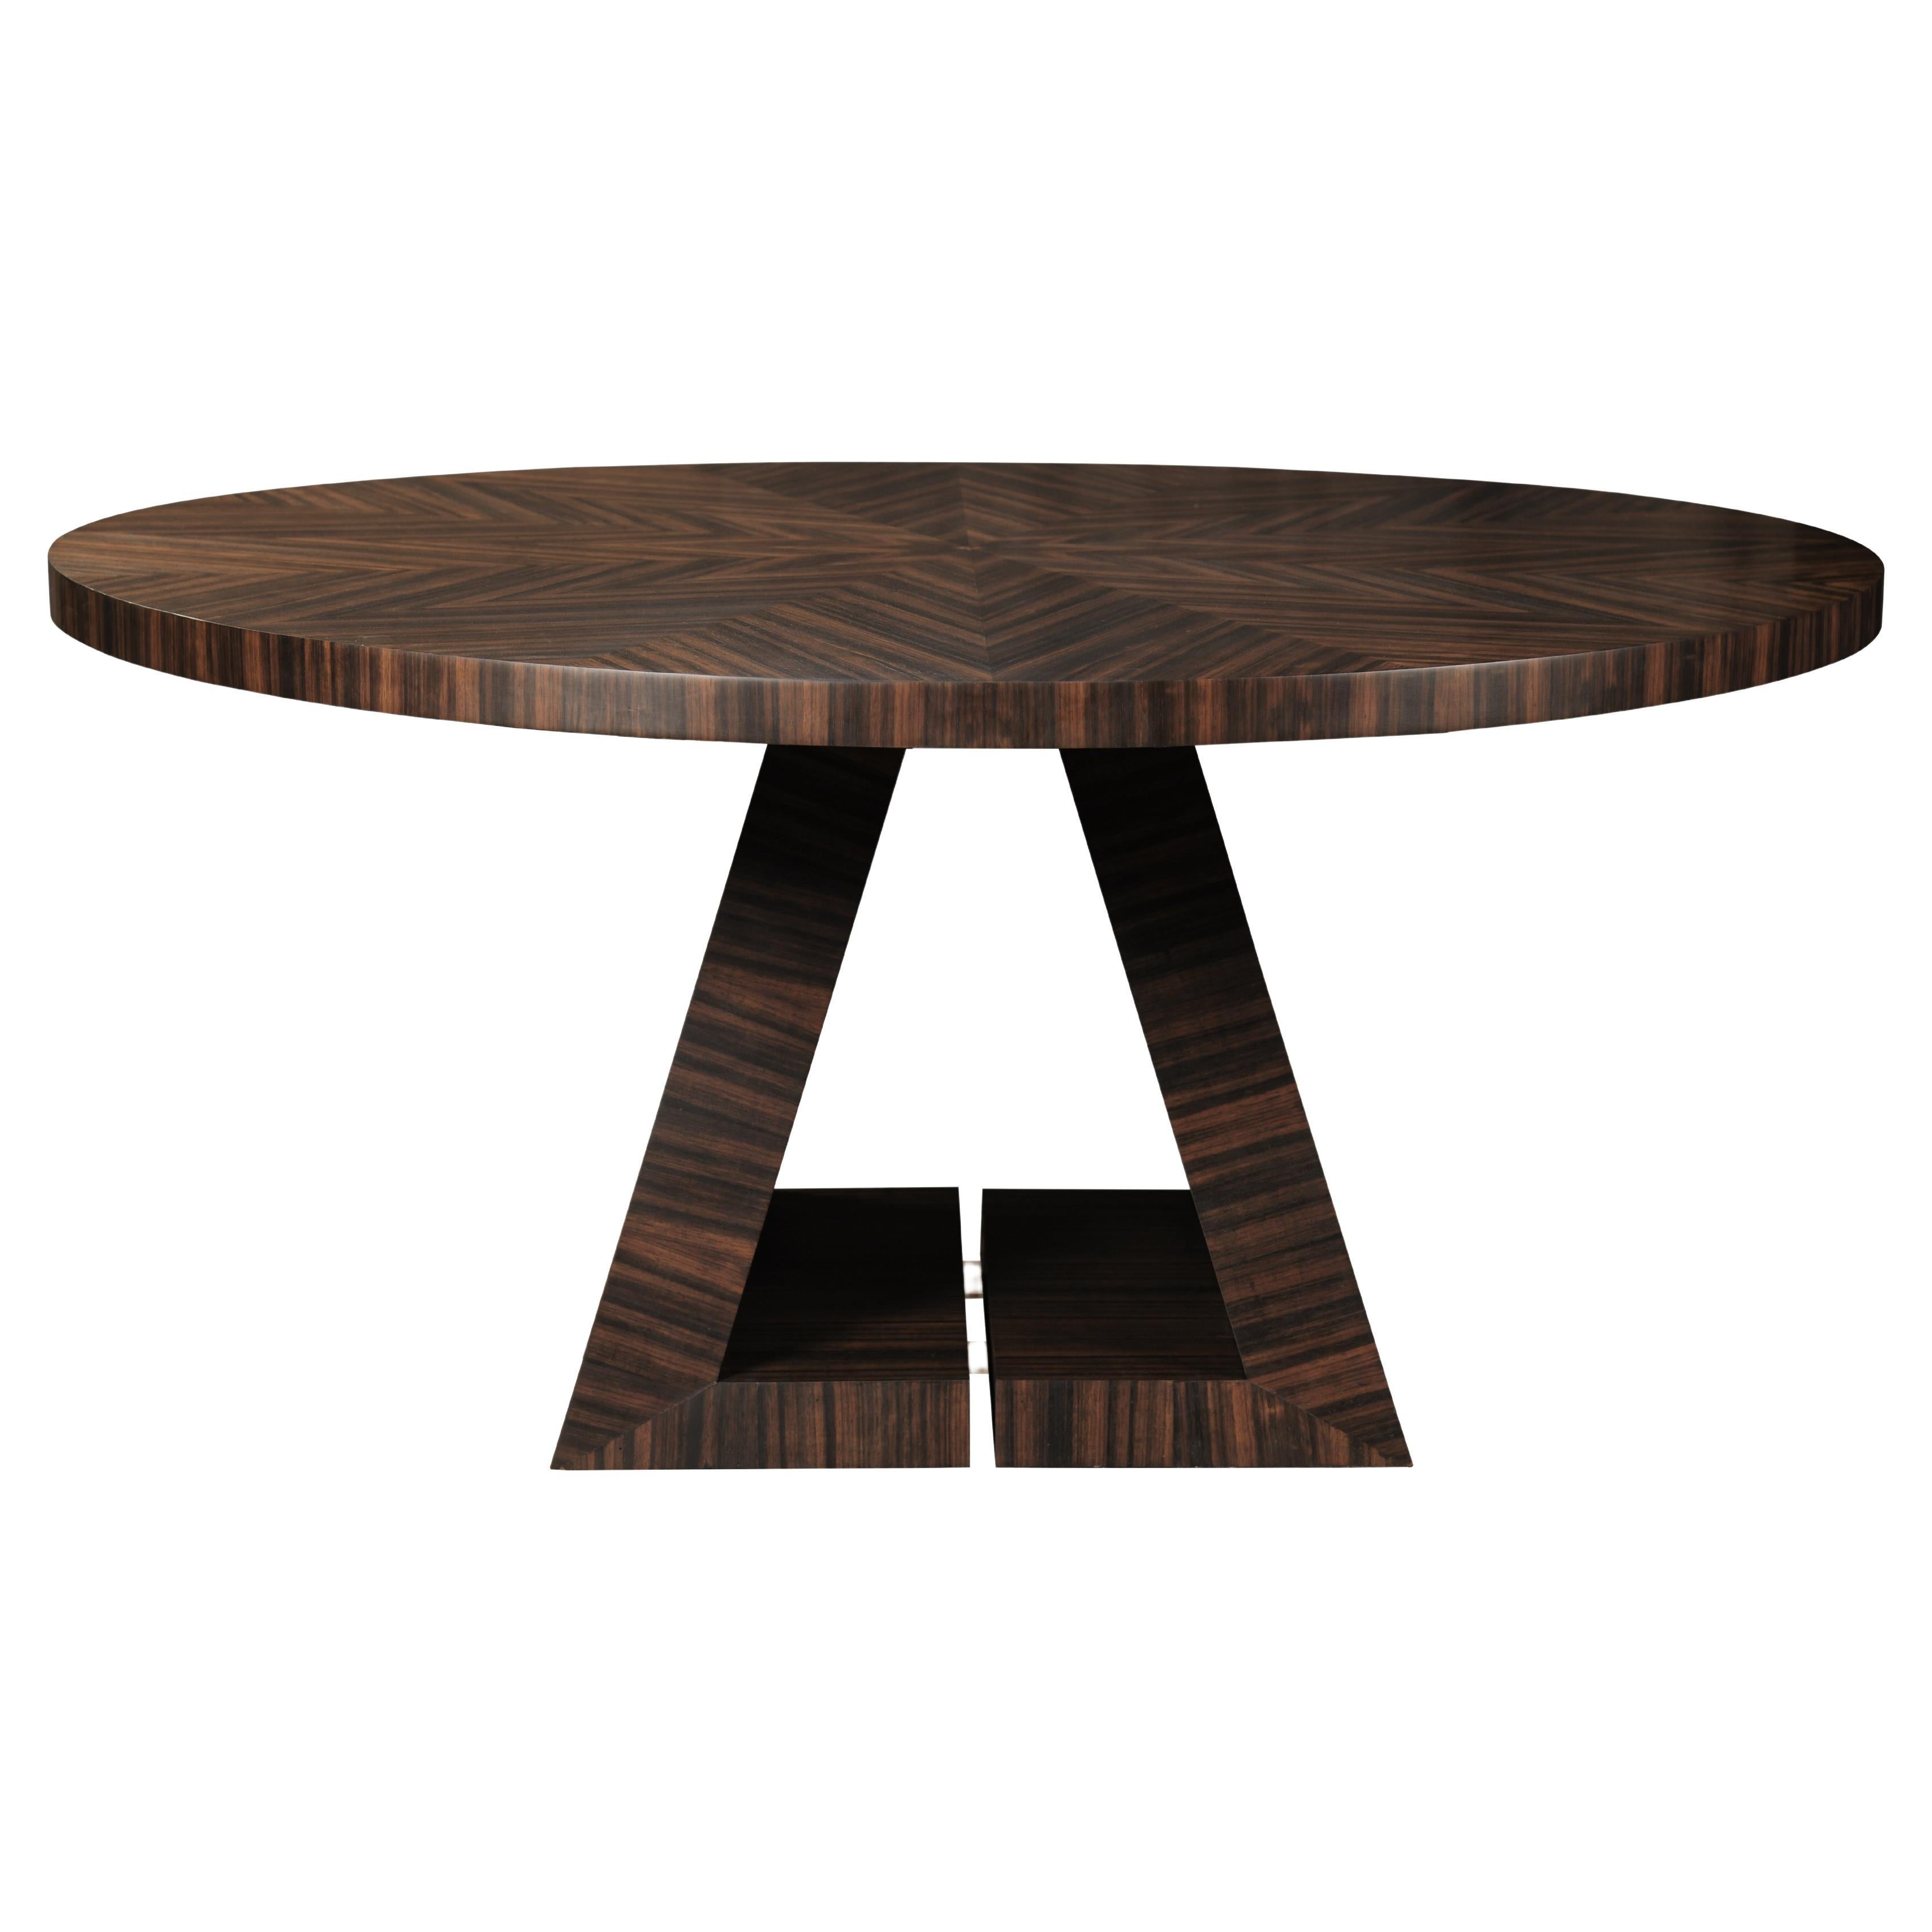 Wood Round Rochelle Dining Table with Ebony Veneer Wax Finish and Brass Details For Sale